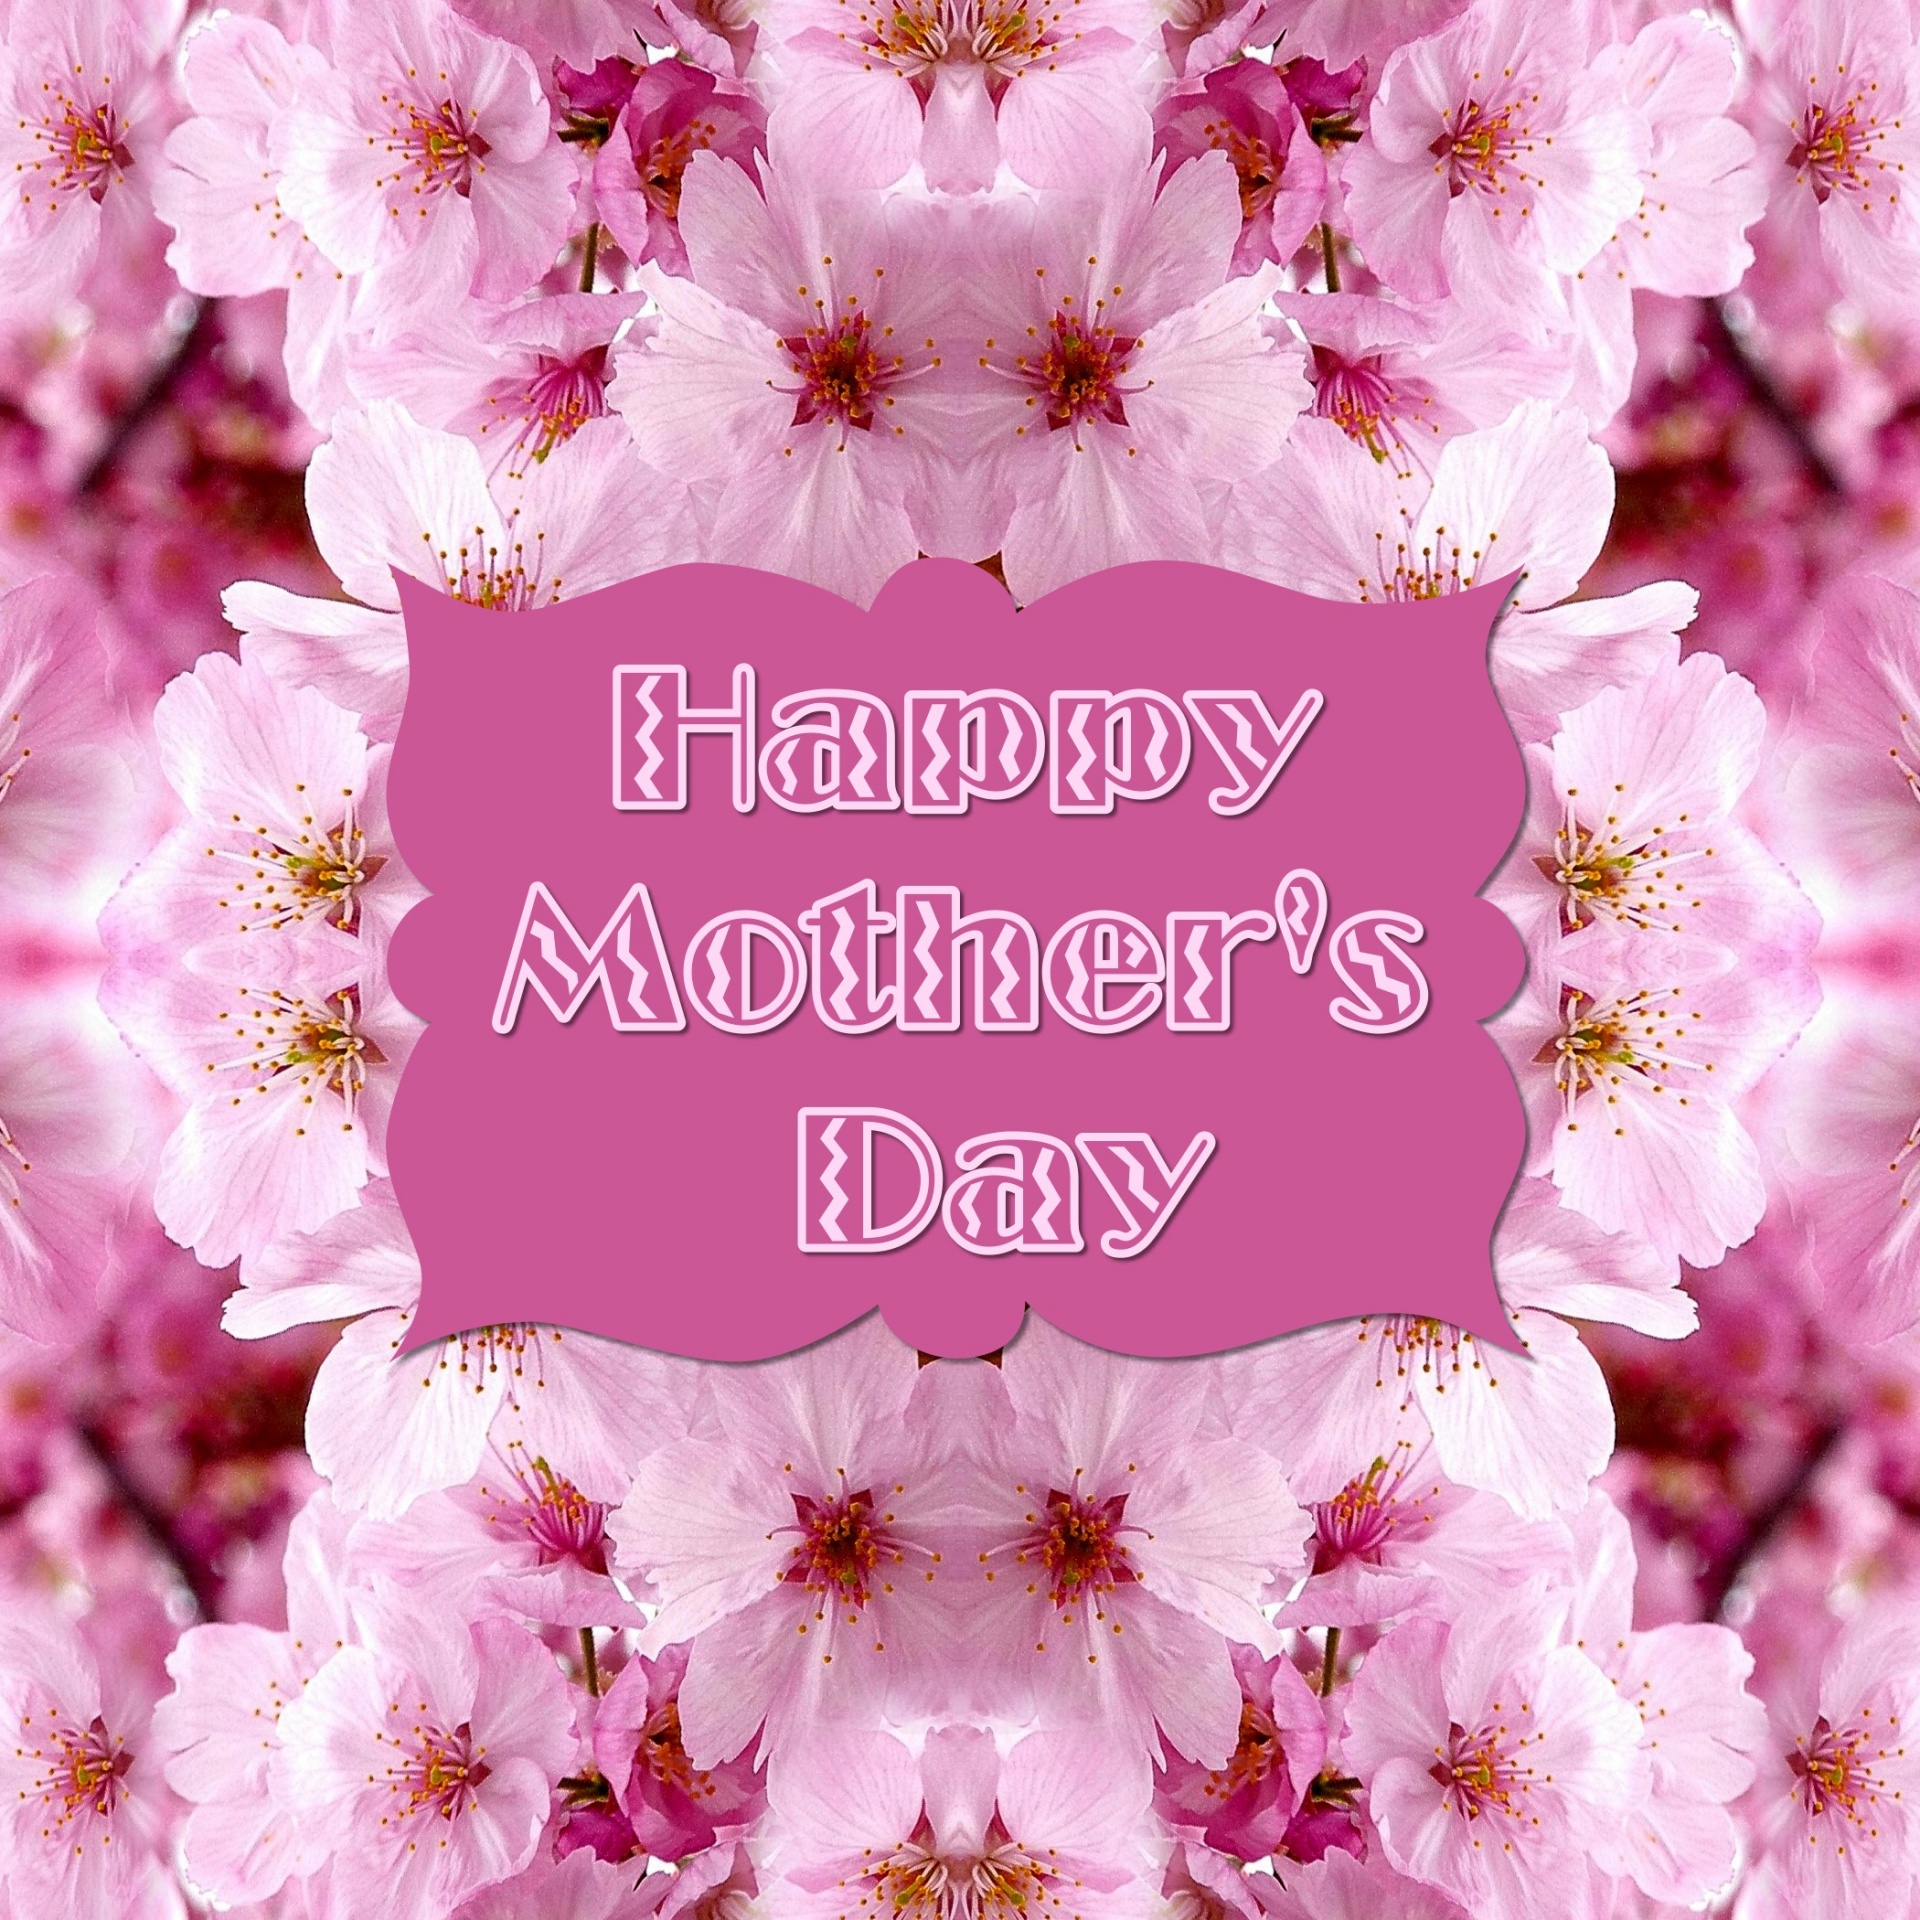 Happy Mother's Day 2018 - 3 Free Stock Photo - Public Domain Pictures